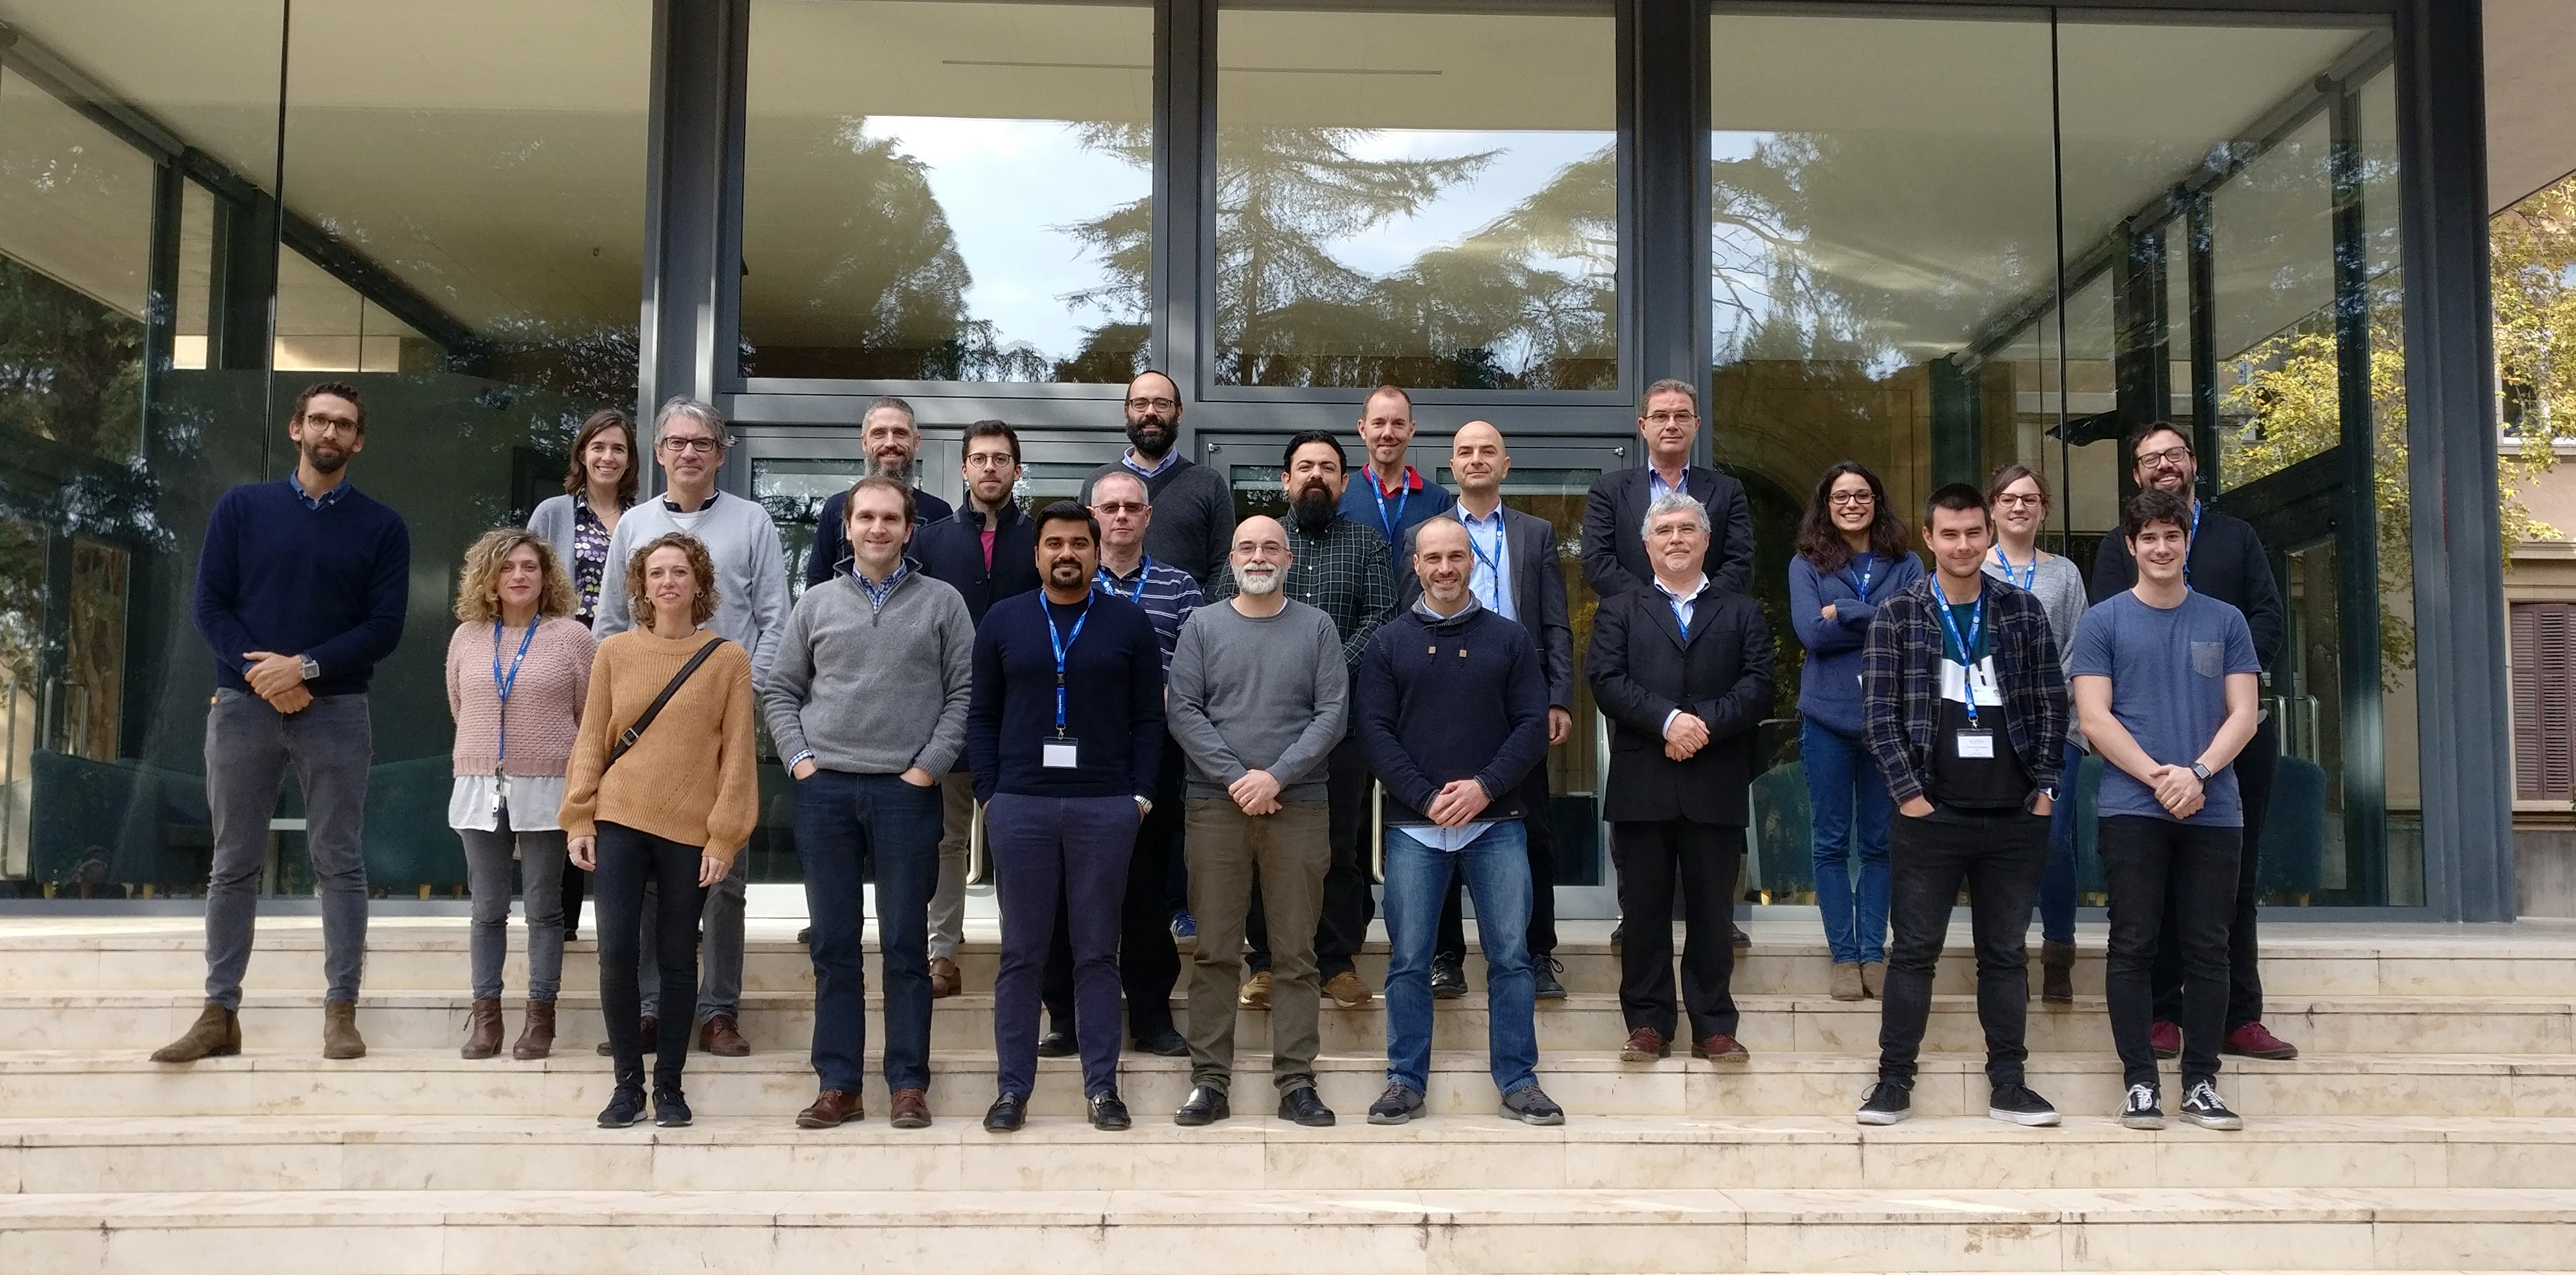 ELASTIC launched its activities in December 2018 at Barcelona Supercomputing Center (BSC).